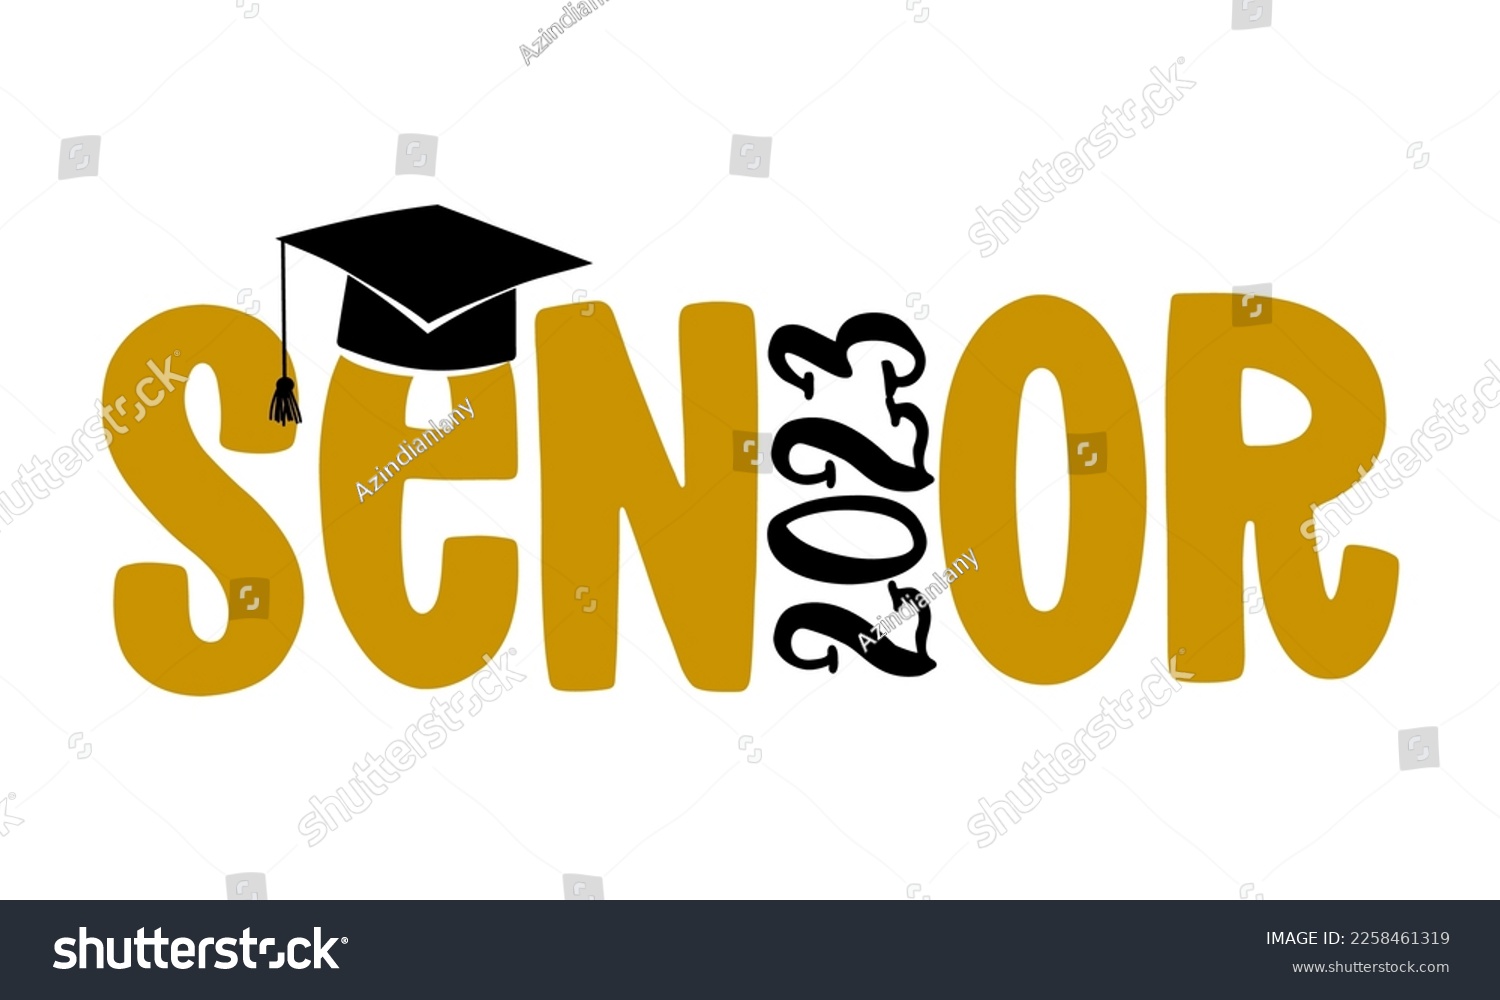 SVG of Senior 2023 - Typography. blck text isolated white background. Vector illustration of a graduating class of 2023. graphics elements for t-shirts, and the idea for the sign svg